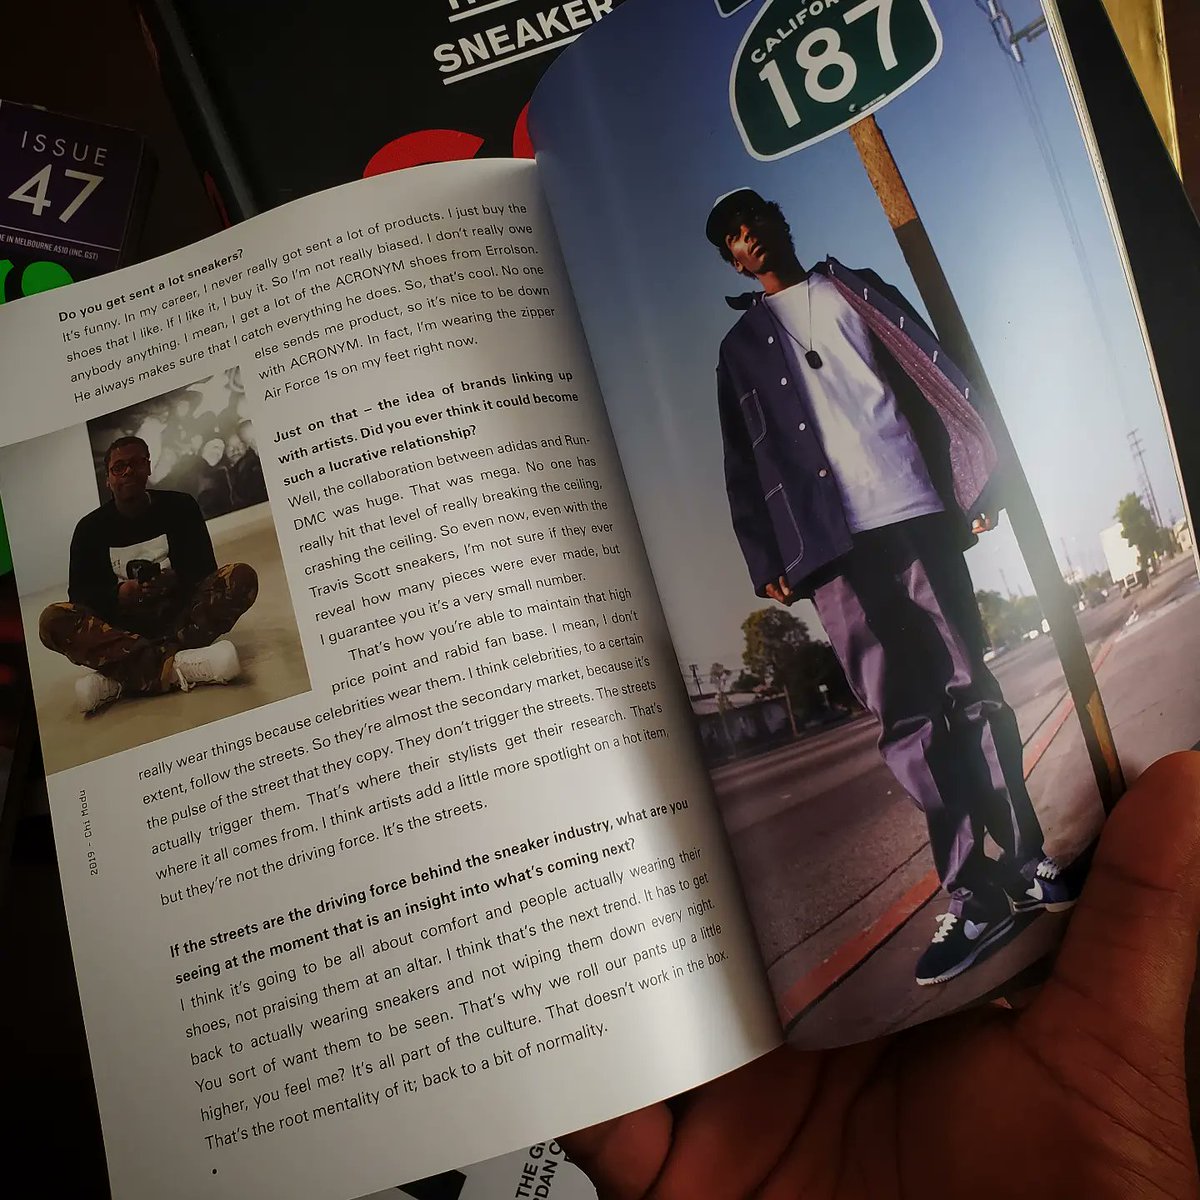 SATURDAY: finally got my last two edition of @sneakerfreakermag .. edition 48 and 42. I'm complete now. On to the next month. 

#GHANA #sneakrfreaker #sneakers #sneakerstories